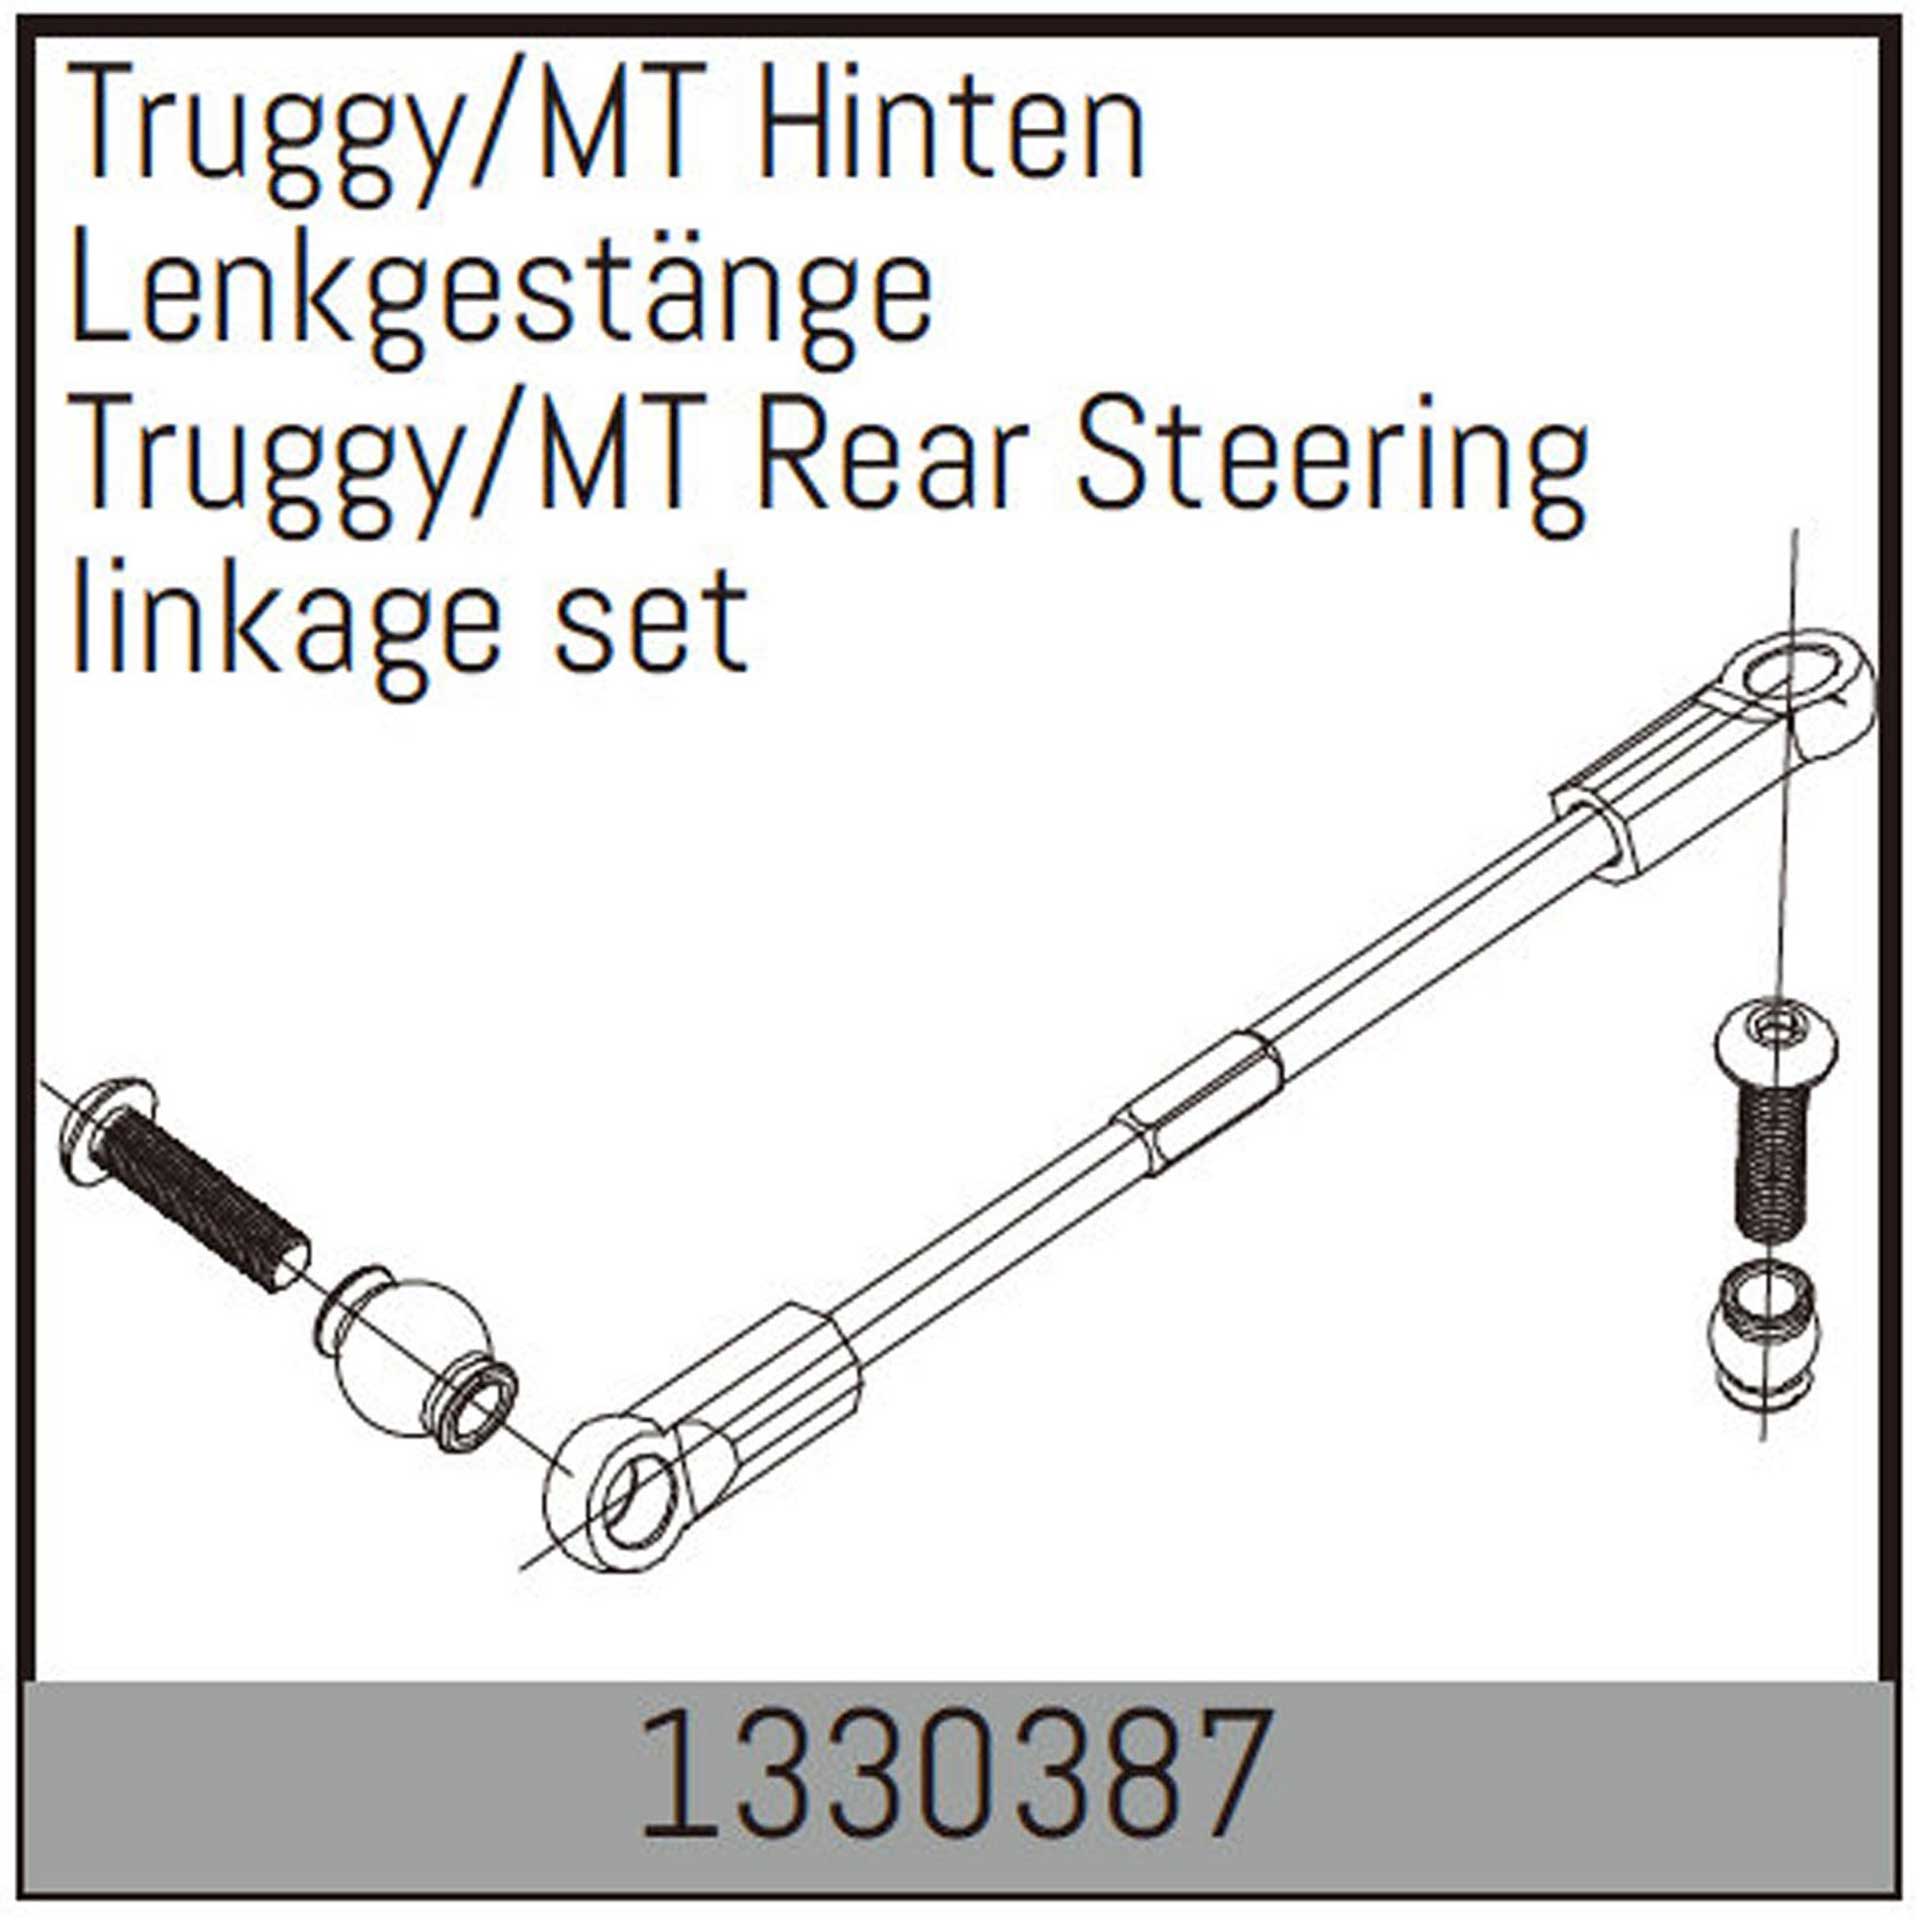 ABSIMA REAR STEERING LINKAGE FOR TRUGGY /MT